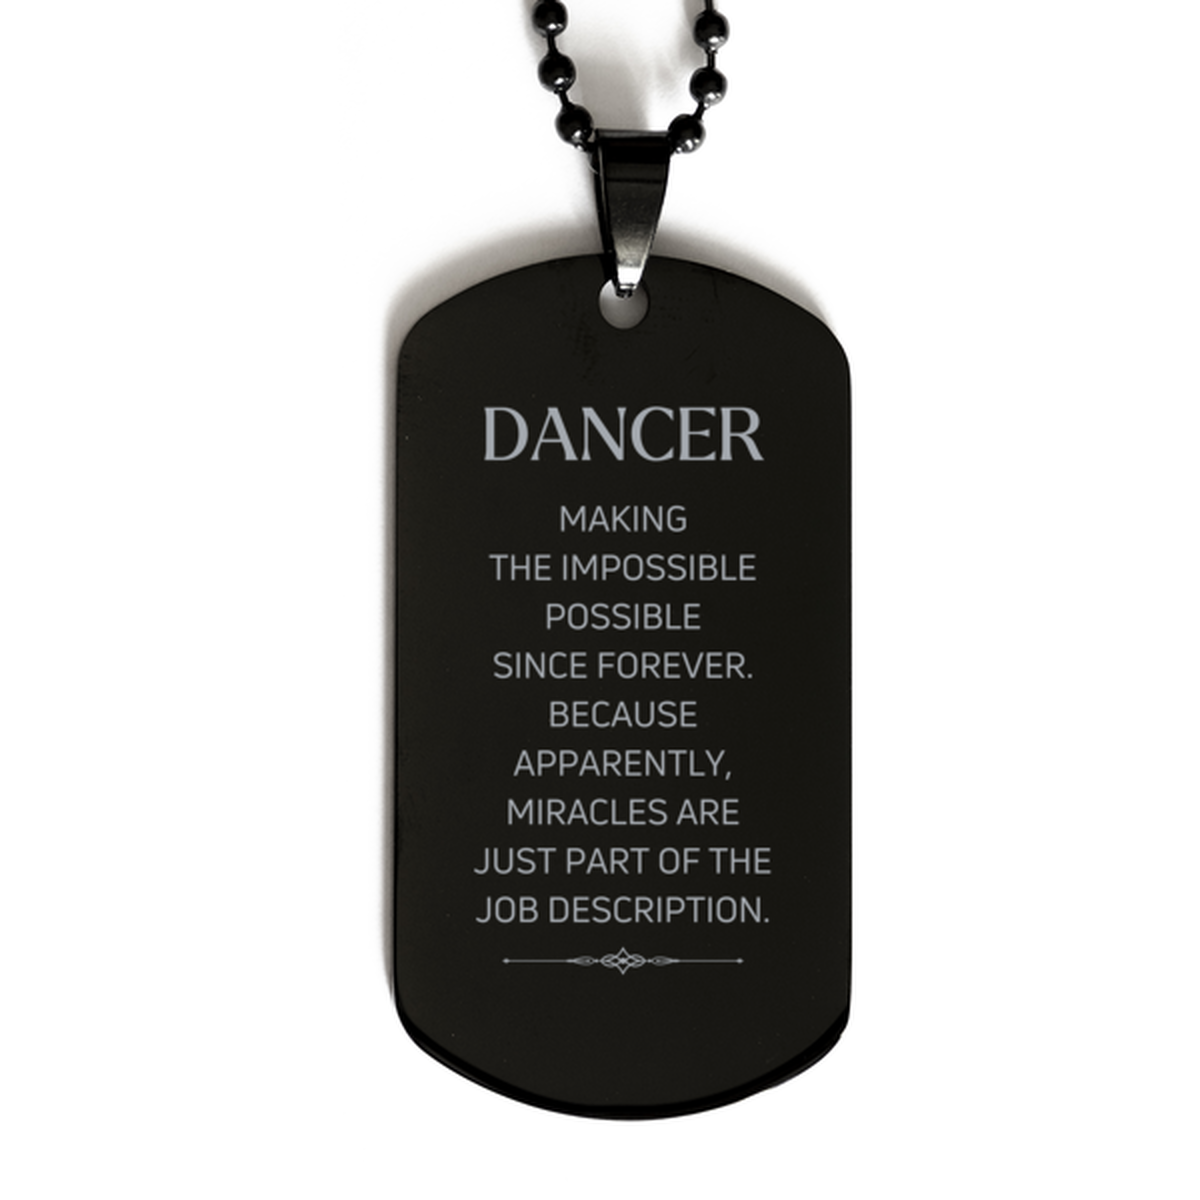 Funny Dancer Gifts, Miracles are just part of the job description, Inspirational Birthday Black Dog Tag For Dancer, Men, Women, Coworkers, Friends, Boss